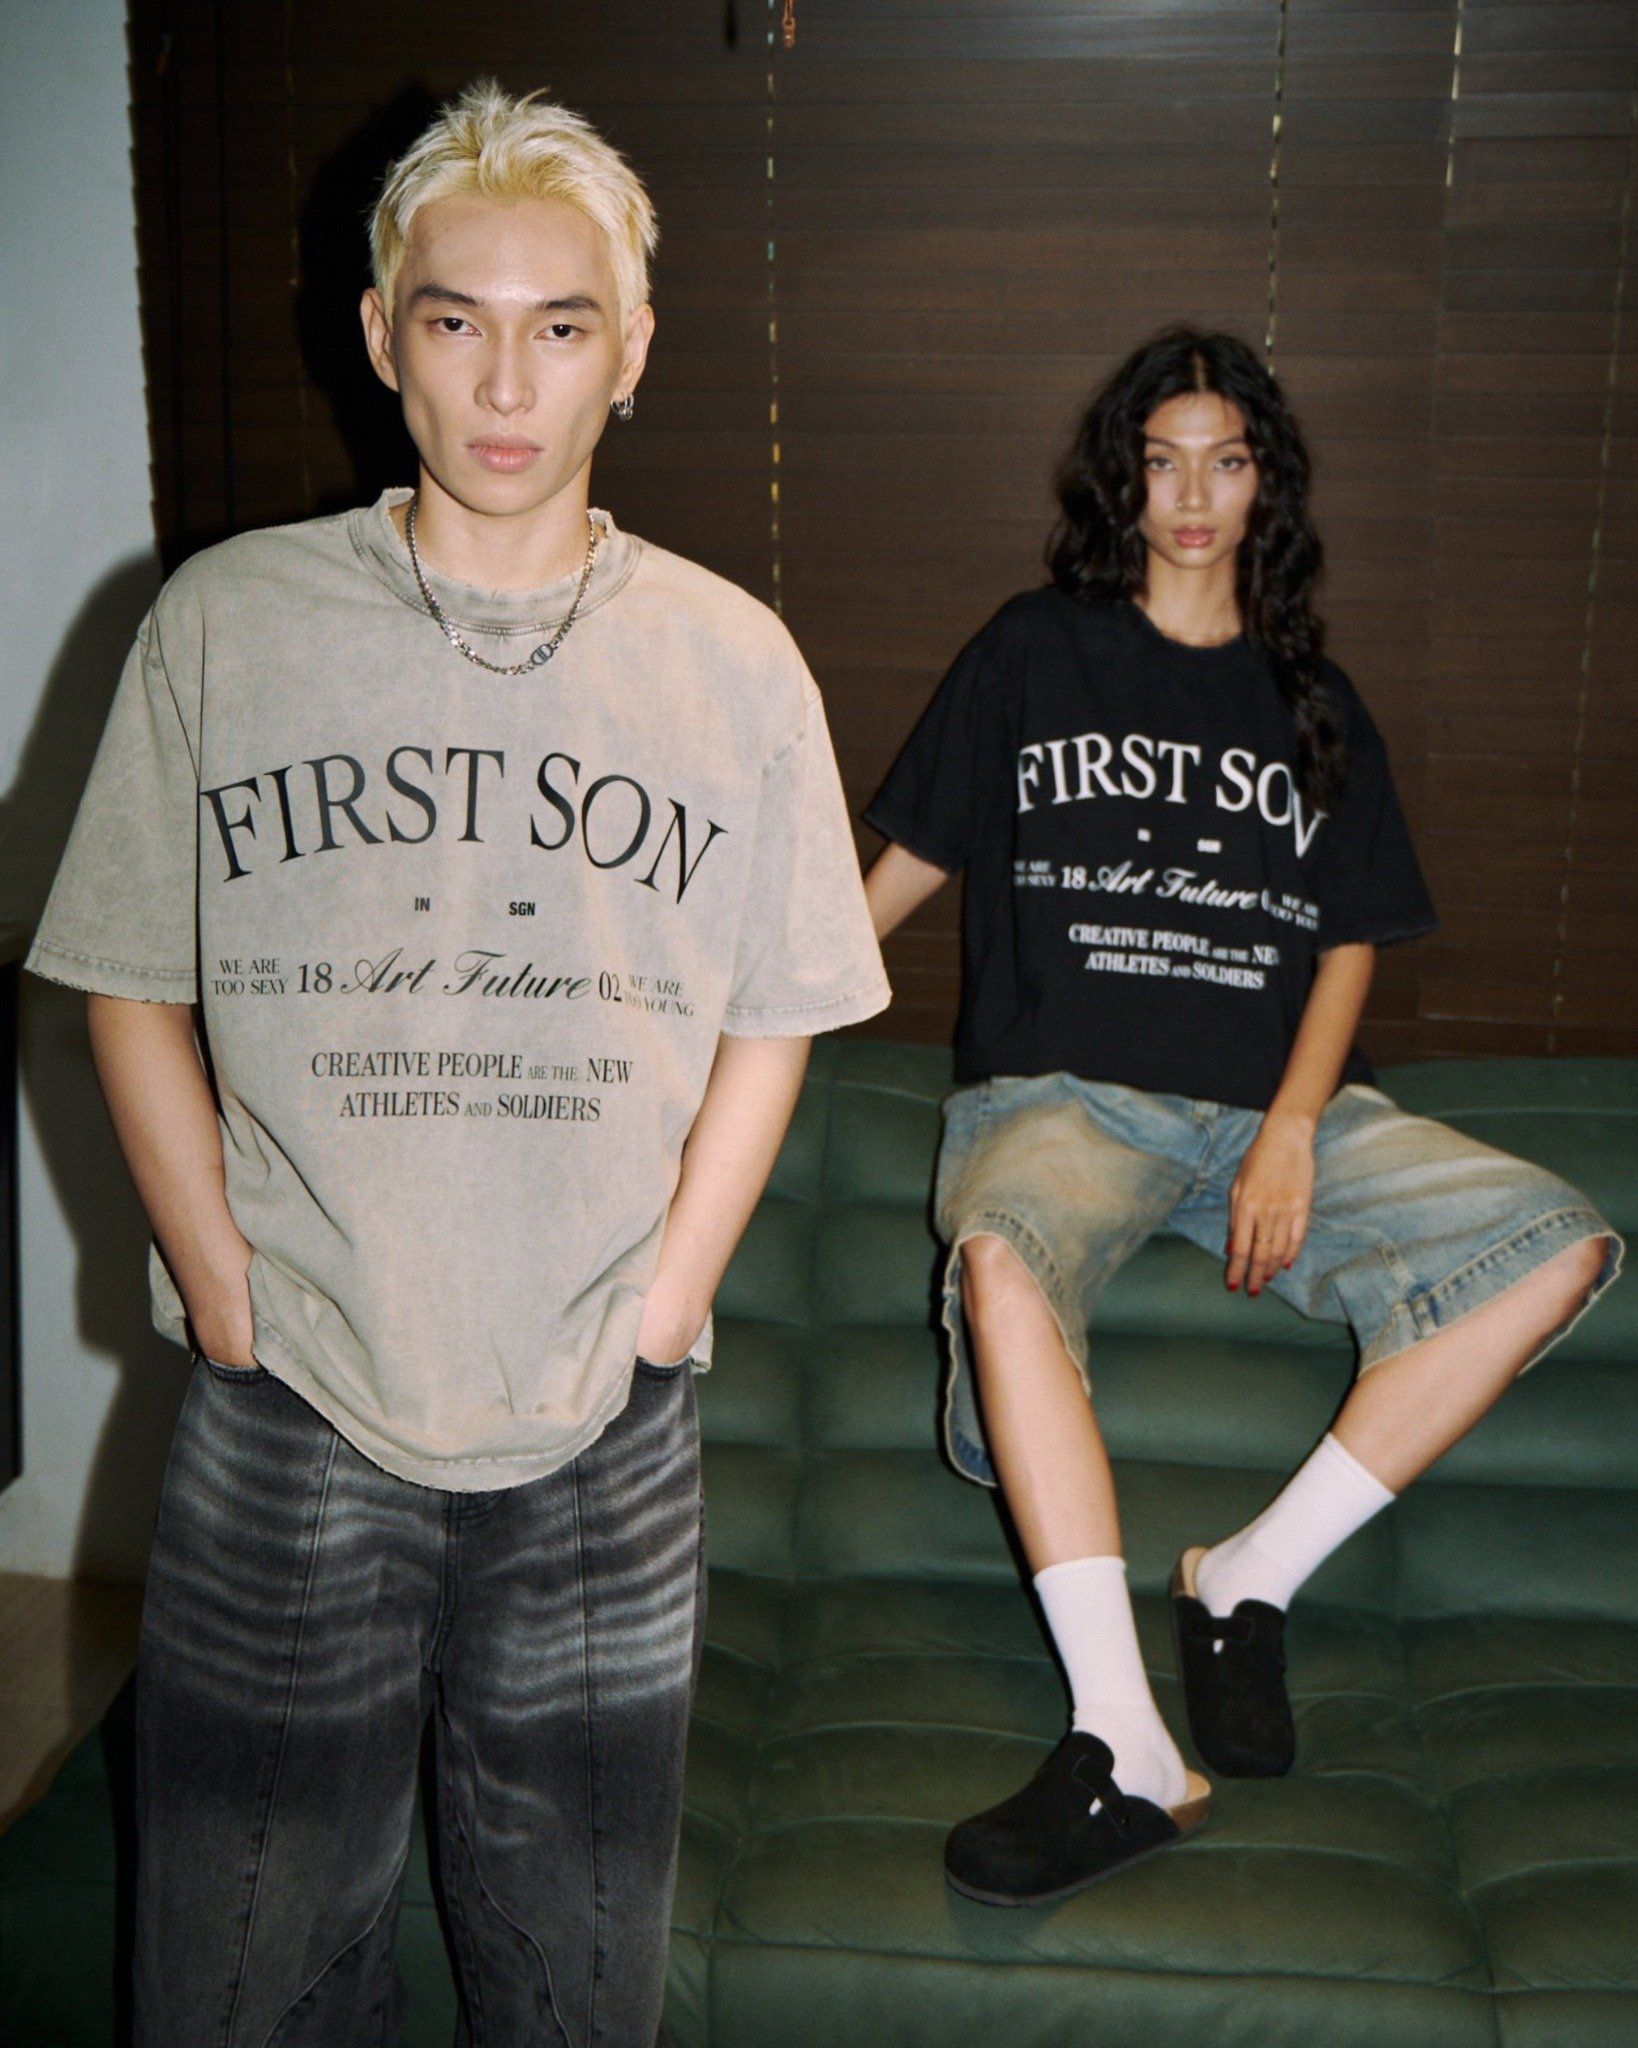  TWG14 - 'FIRST SON' VINTAGE TEE - SAND 